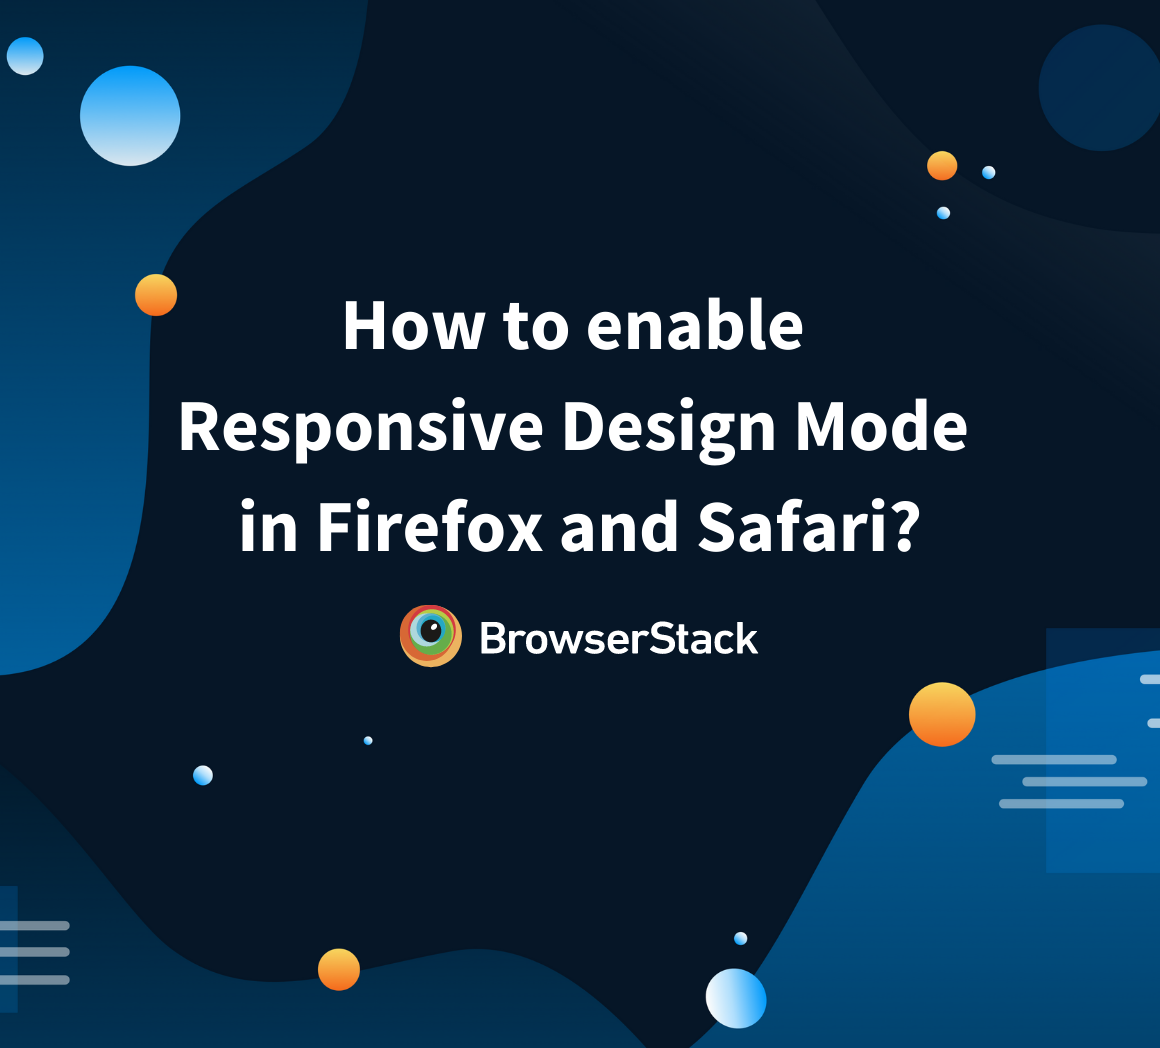 How to enable Responsive Design Mode in Firefox and Safari?